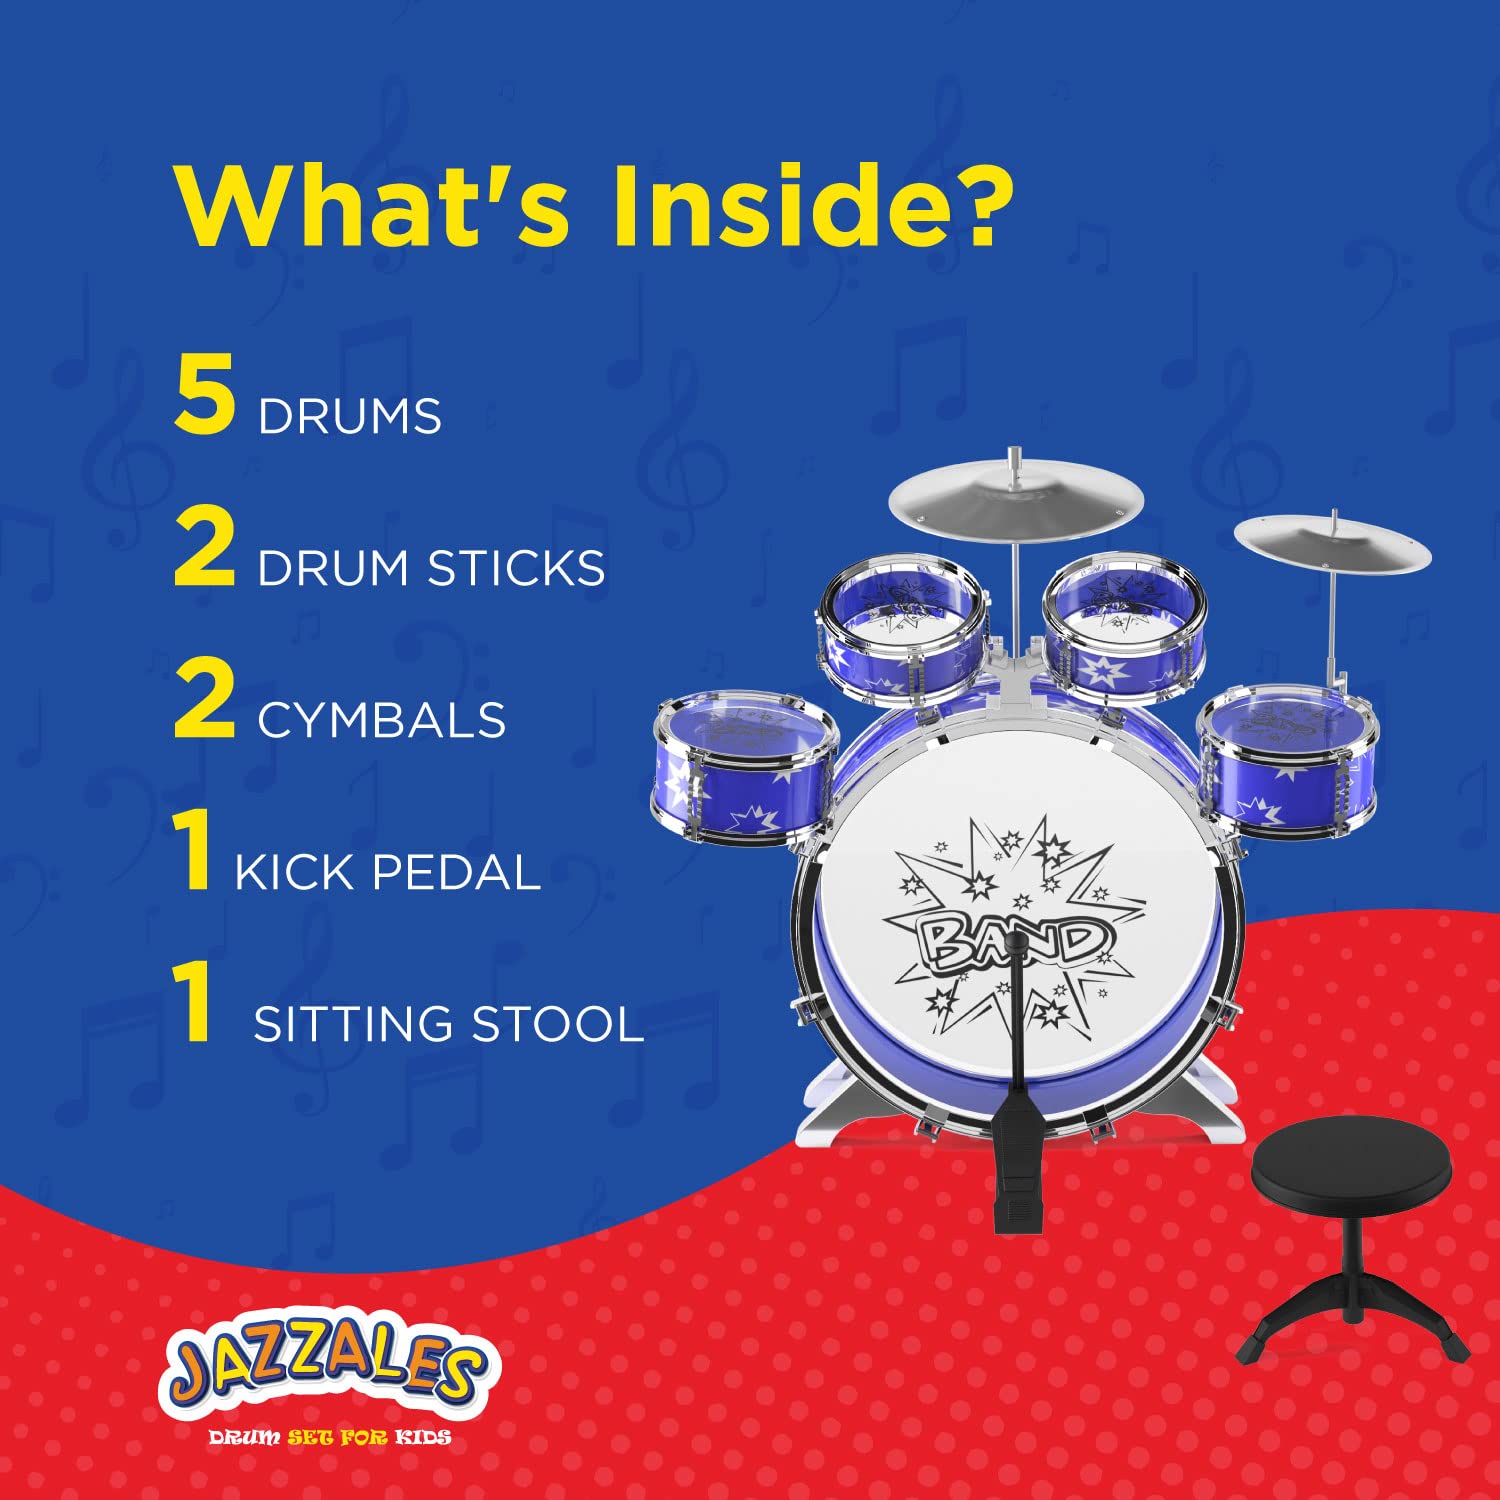 EMAAS Kids Jazz Drum Set for Kids – 5 Drums, 2 Drumsticks, Kick Pedal, Cymbal Chair, Stool – Ideal Gift Toy for Kids, Teens, Boys & Girls - Stimulates Musical Talent Imagination and Creativity